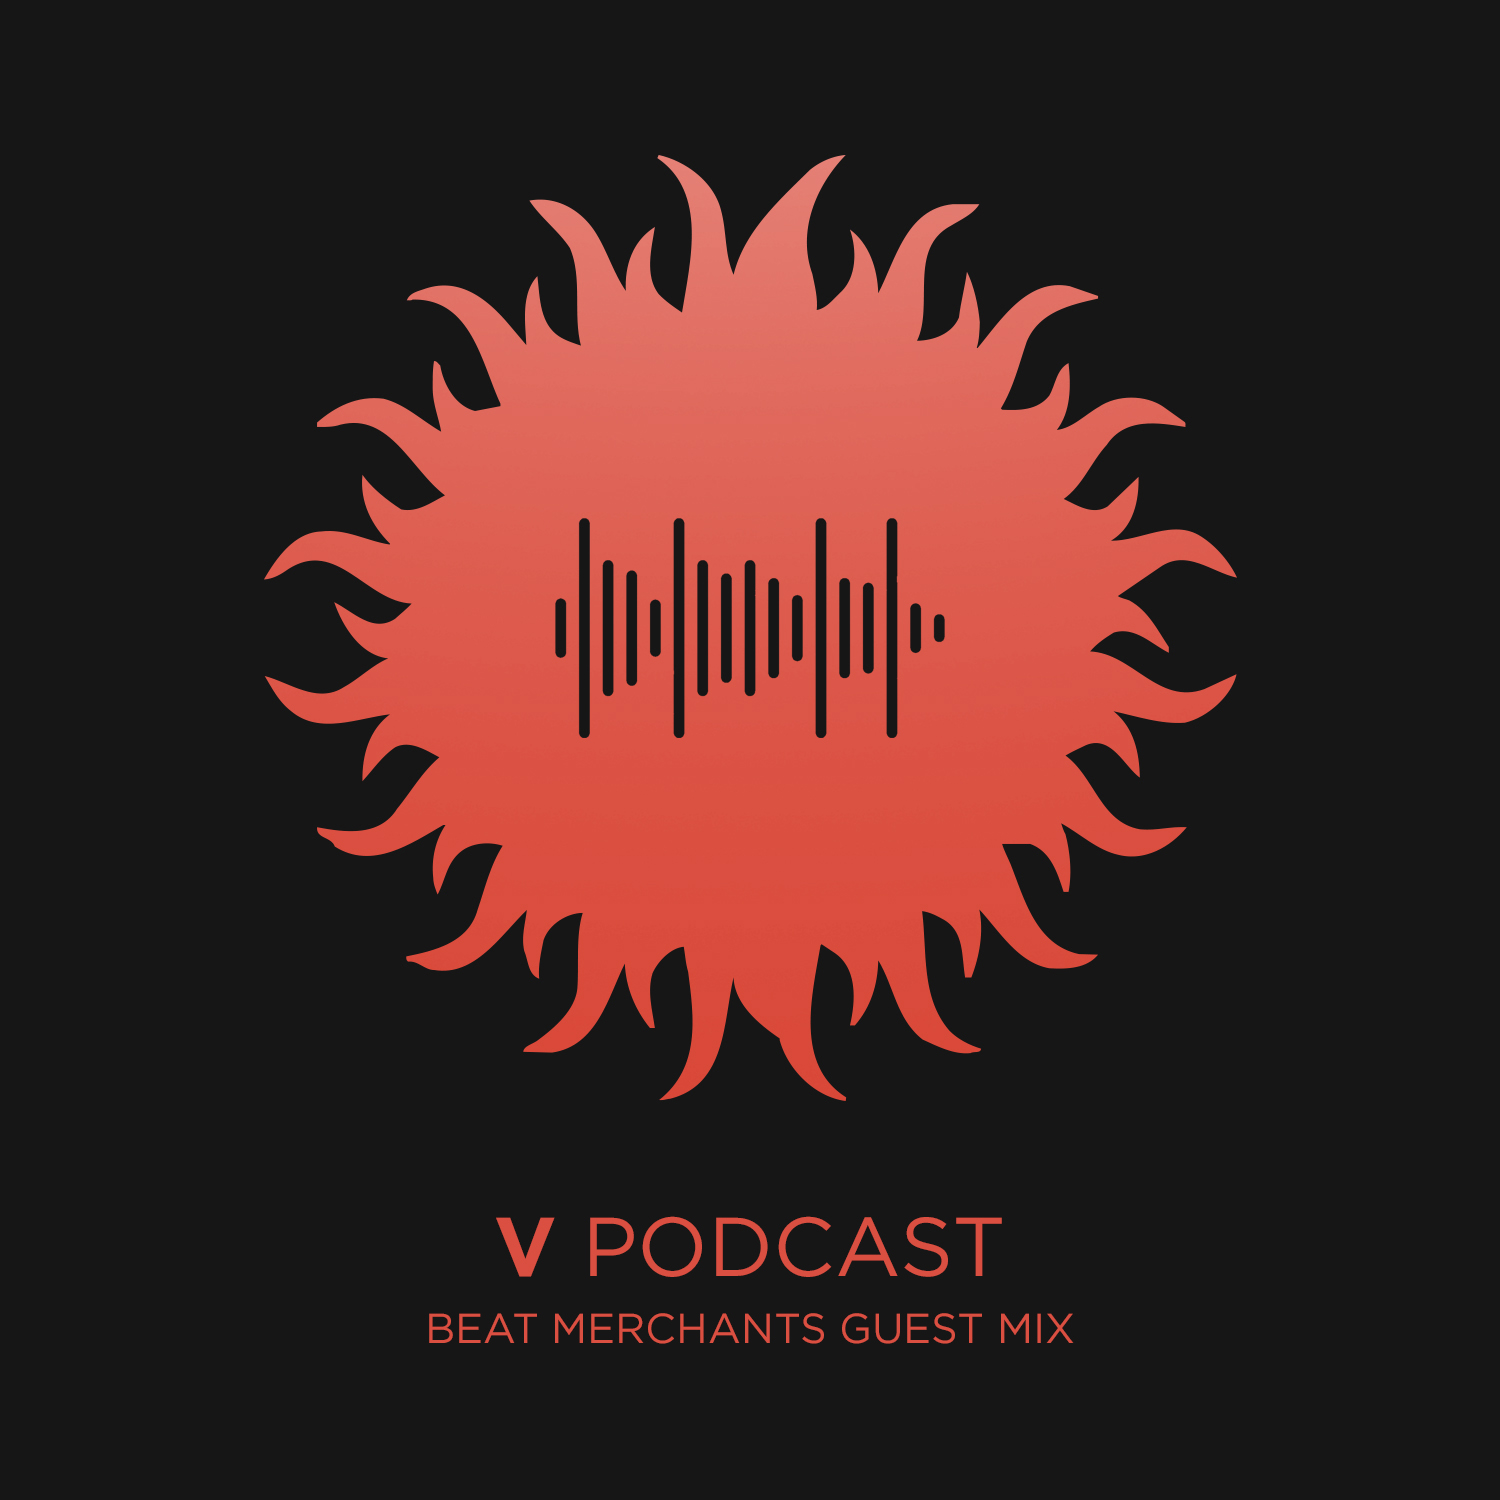 V Podcast 097 - Drum and Bass - Hosted by Bryan Gee Artwork